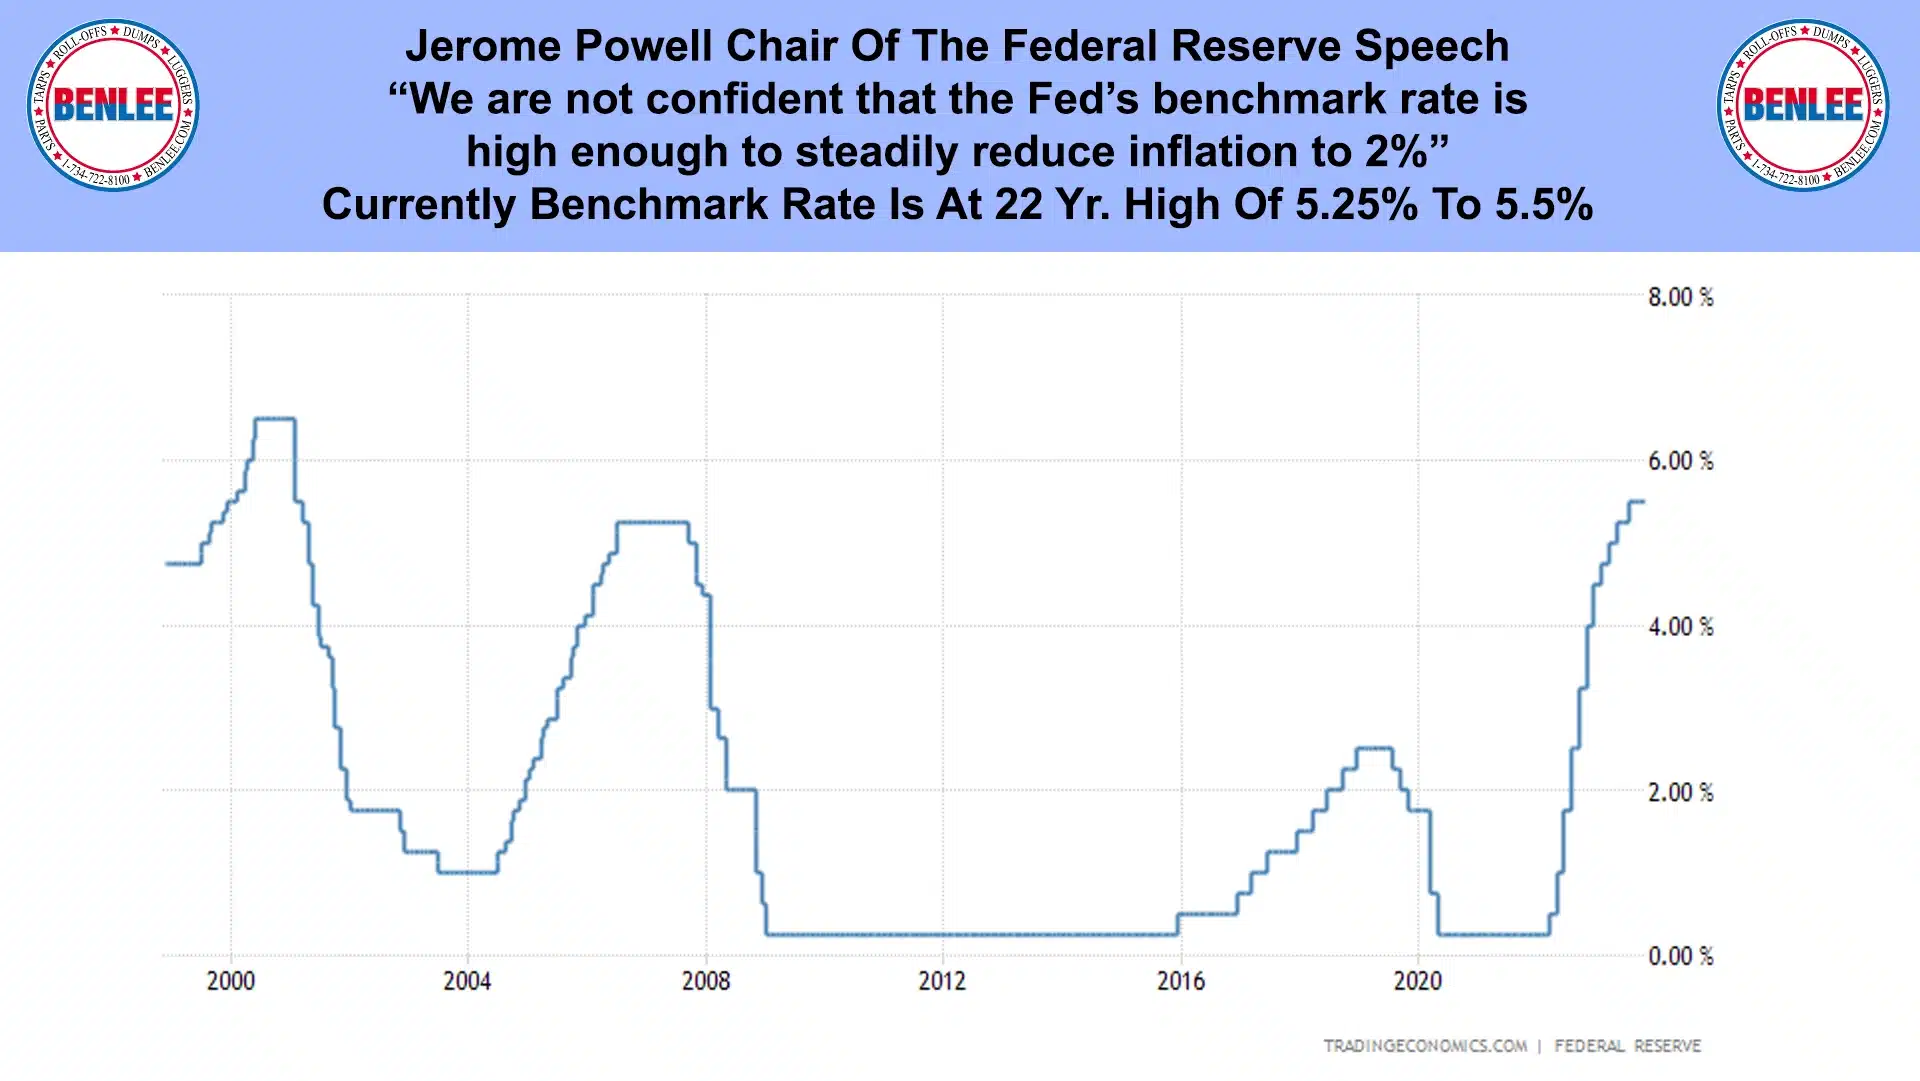 Jerome Powell Chair Of The Federal Reserve Speech